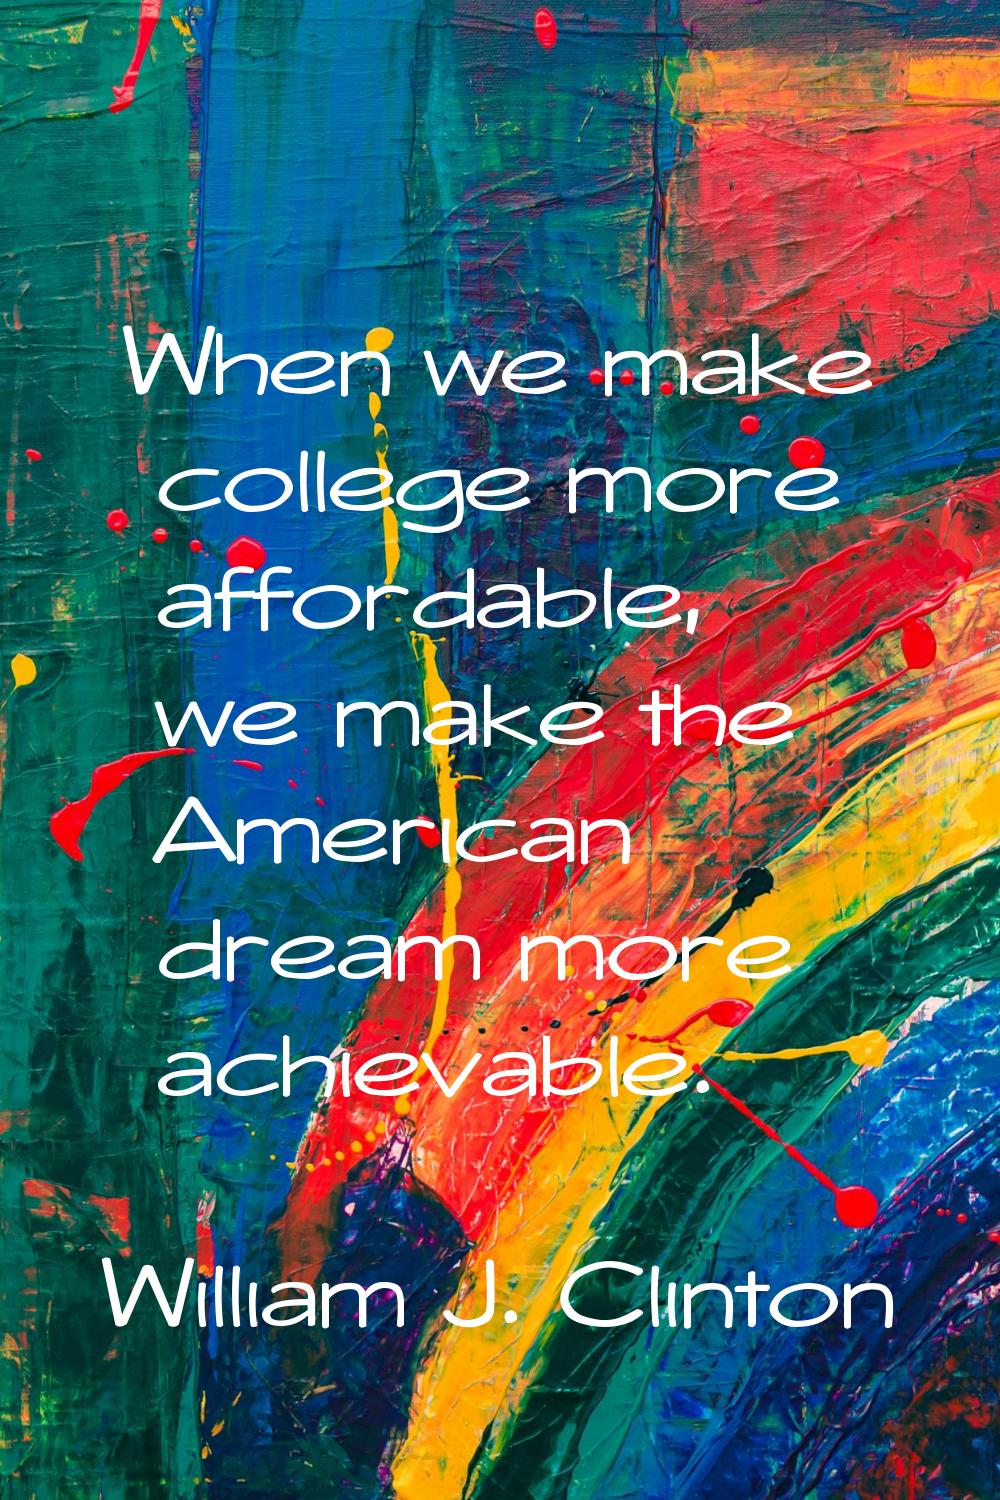 When we make college more affordable, we make the American dream more achievable.